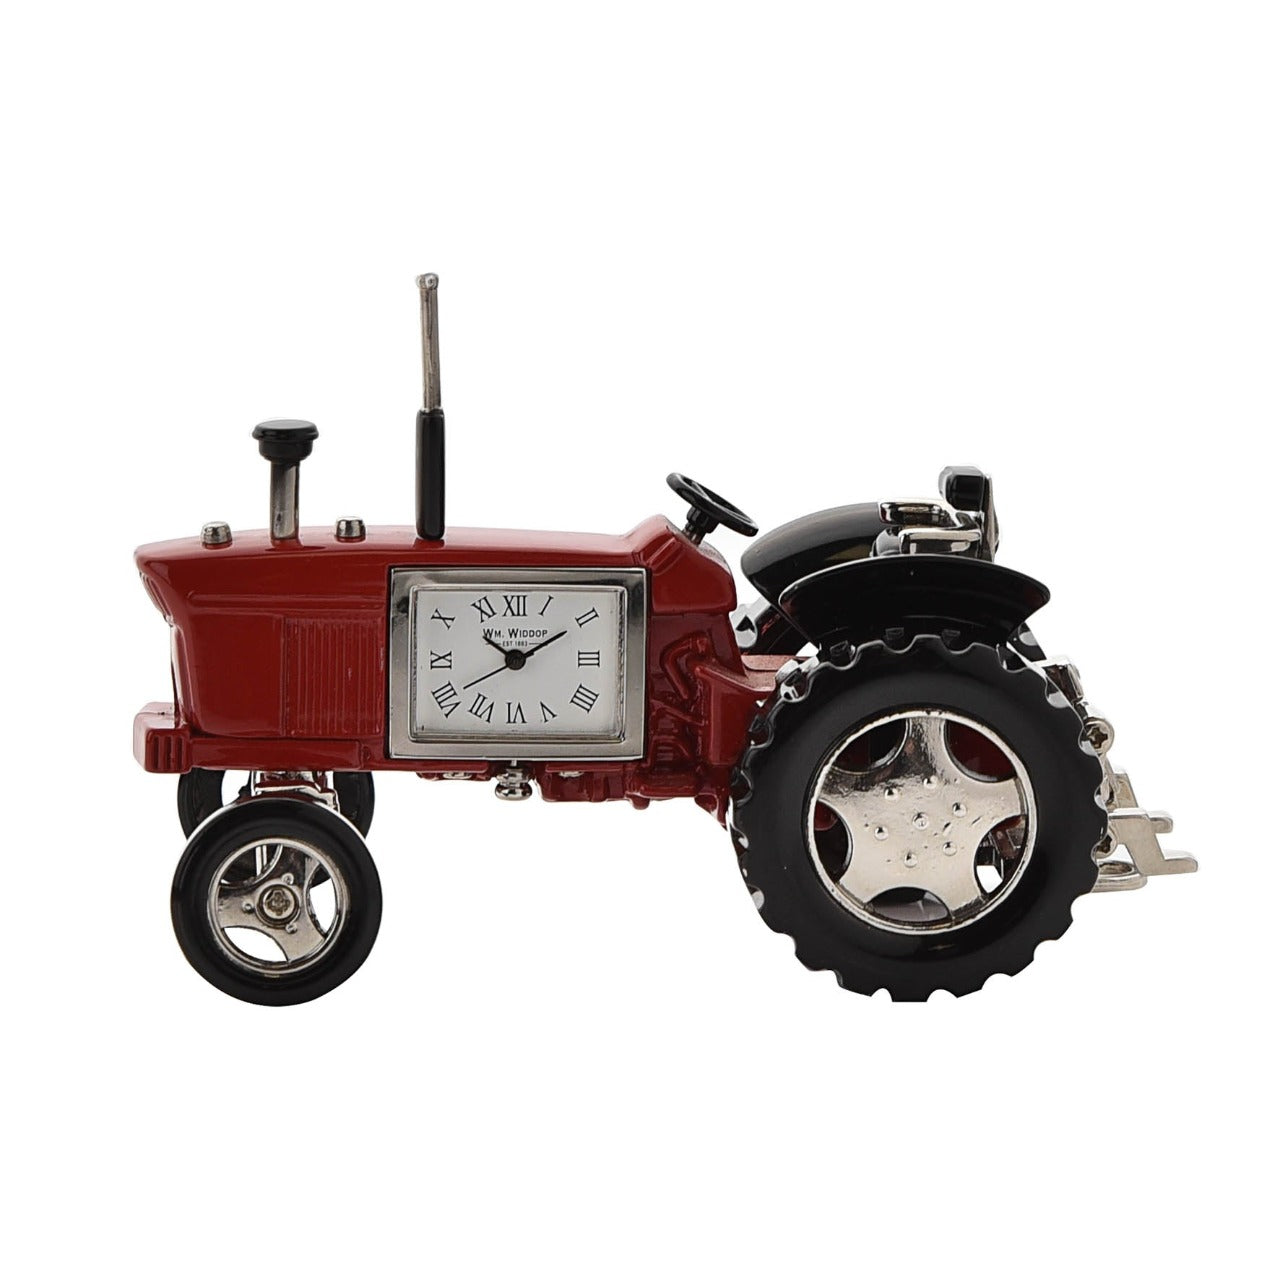 Miniature Clock Farmers Red Tractor by William Widdop  Bring a unique and quirky touch to the home with this stylish miniature clock made with great attention to detail.  The miniature tractor is a great gift for someone who has an interest in the farming world.